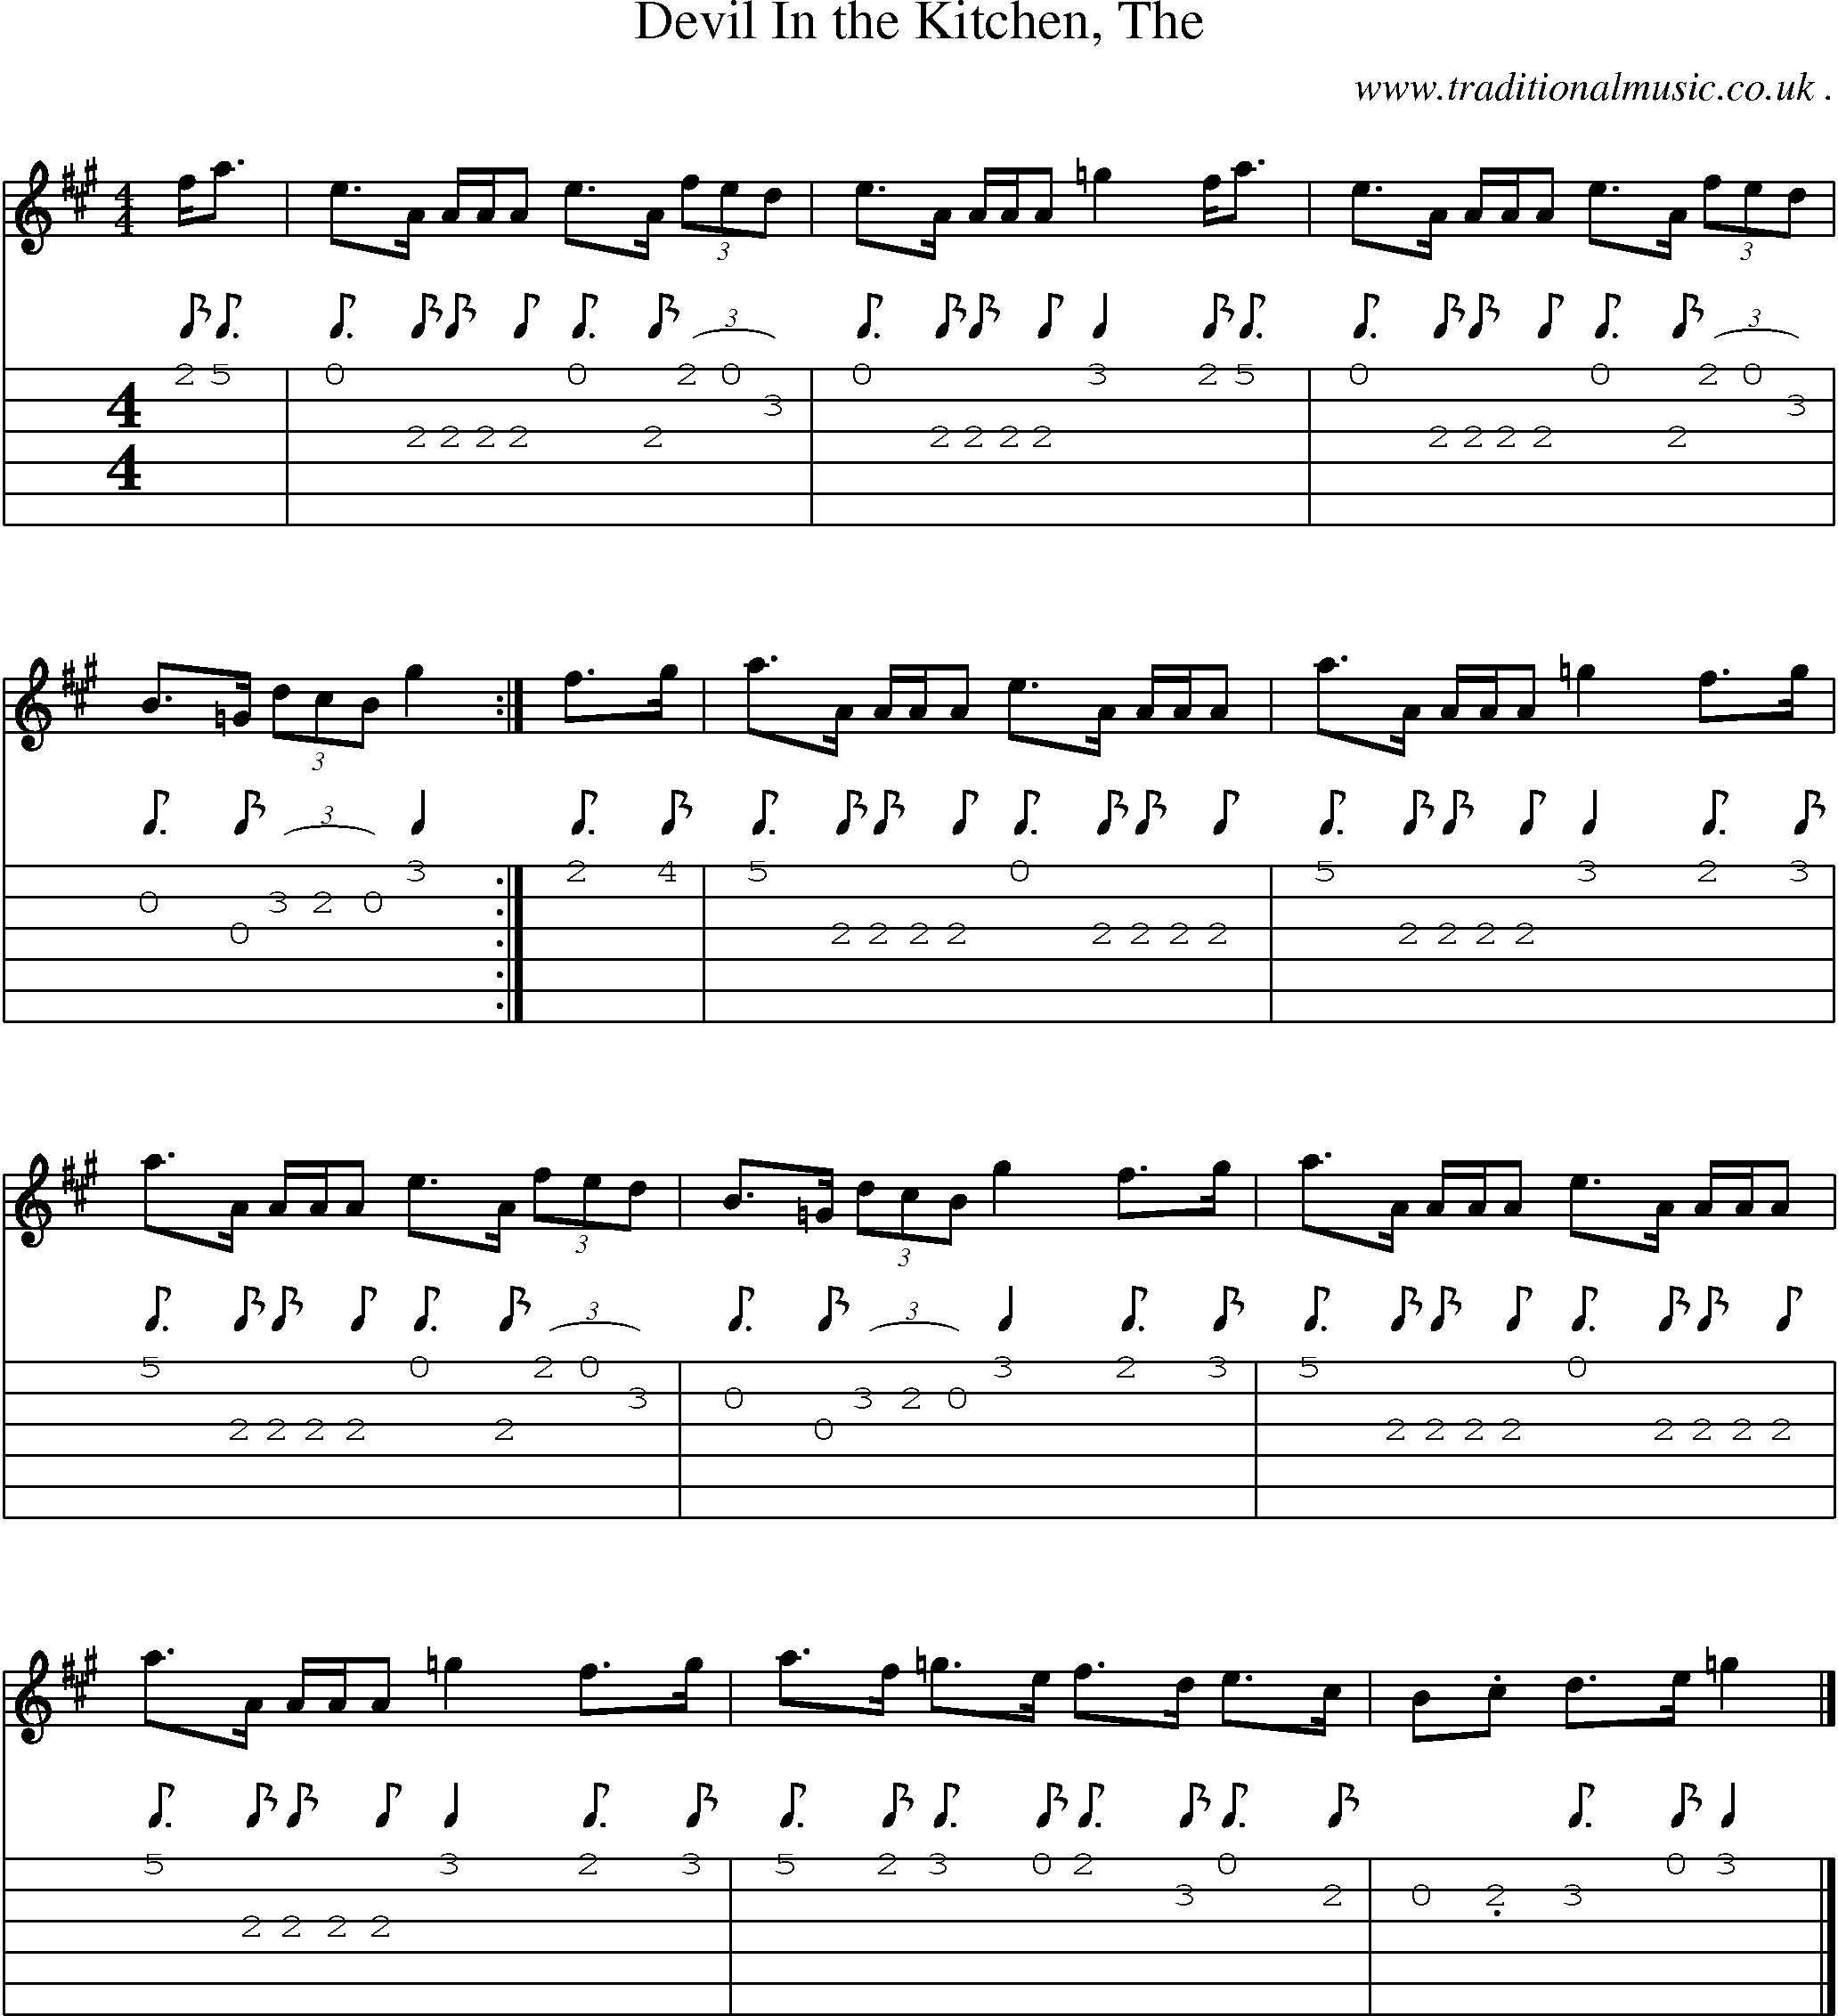 Sheet-music  score, Chords and Guitar Tabs for Devil In The Kitchen The